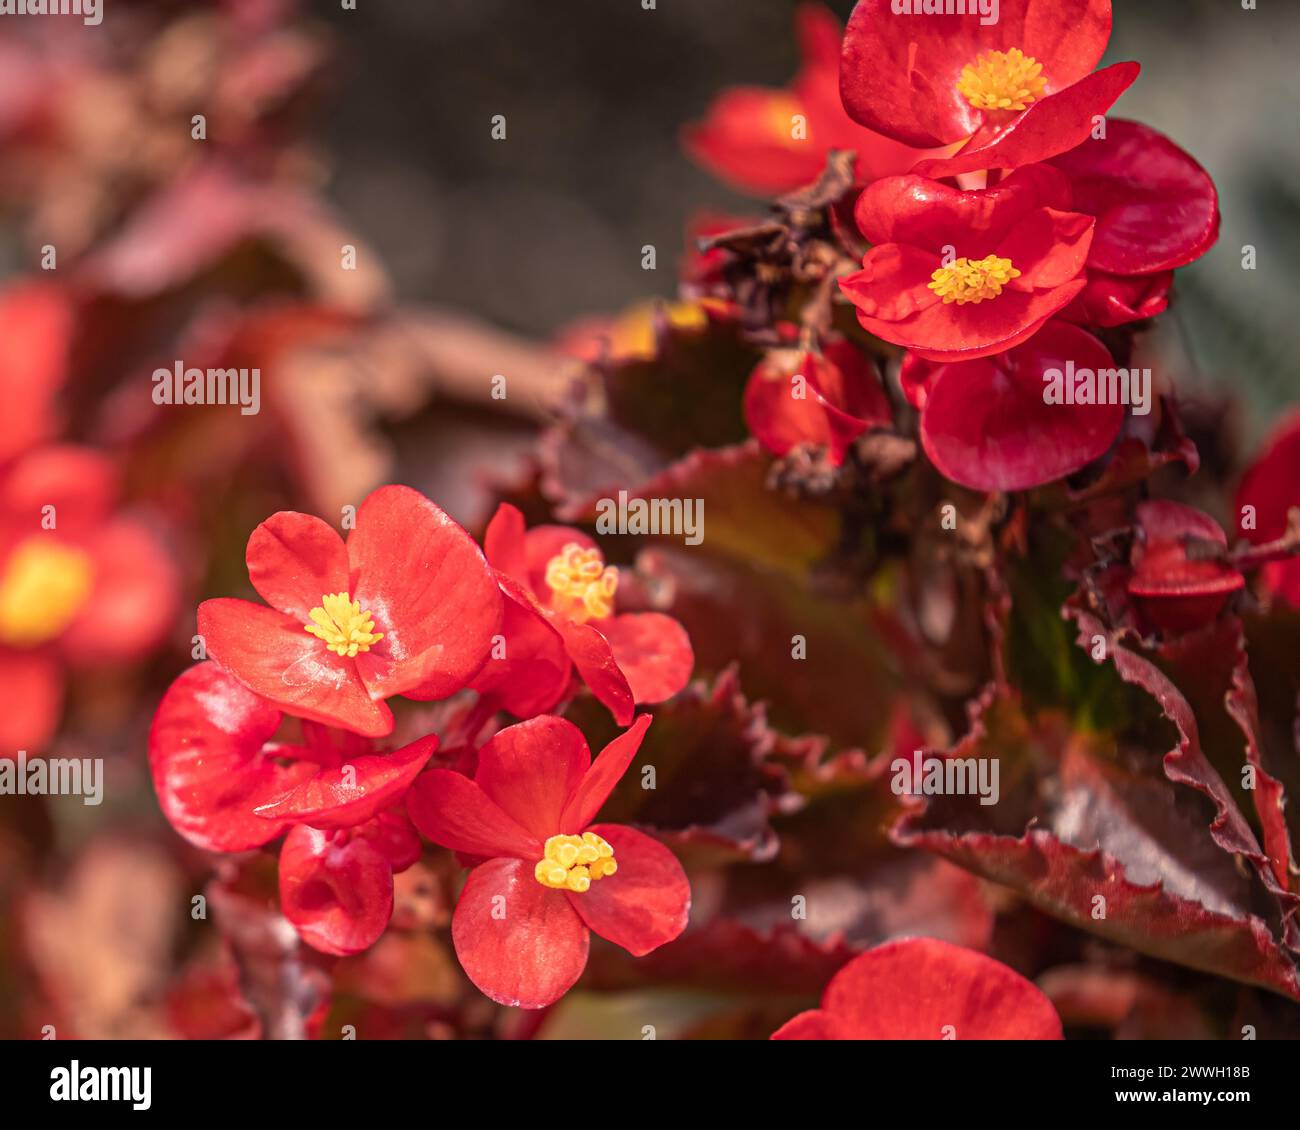 Red Begonia flower in ful bloom Stock Photo